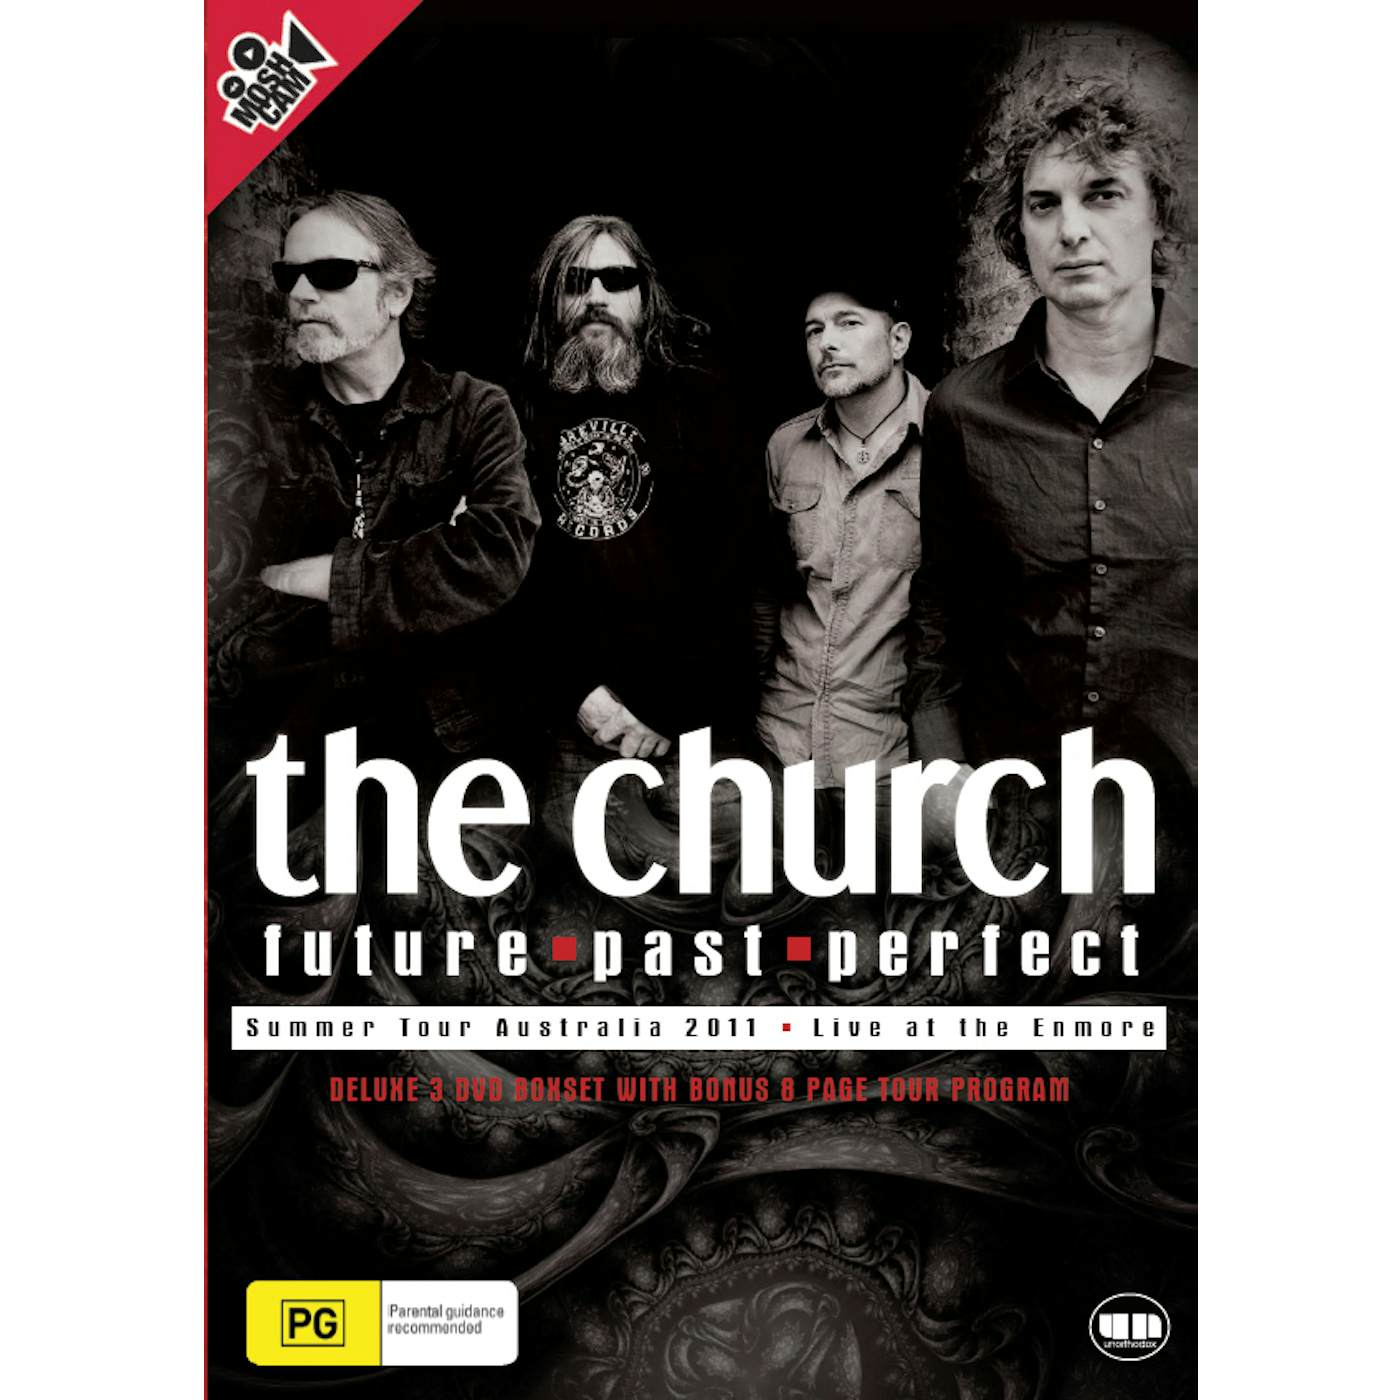 The Church FUTURE PAST PERFECT (LIVE AT THE ENMORE AUSTRALIA) DVD